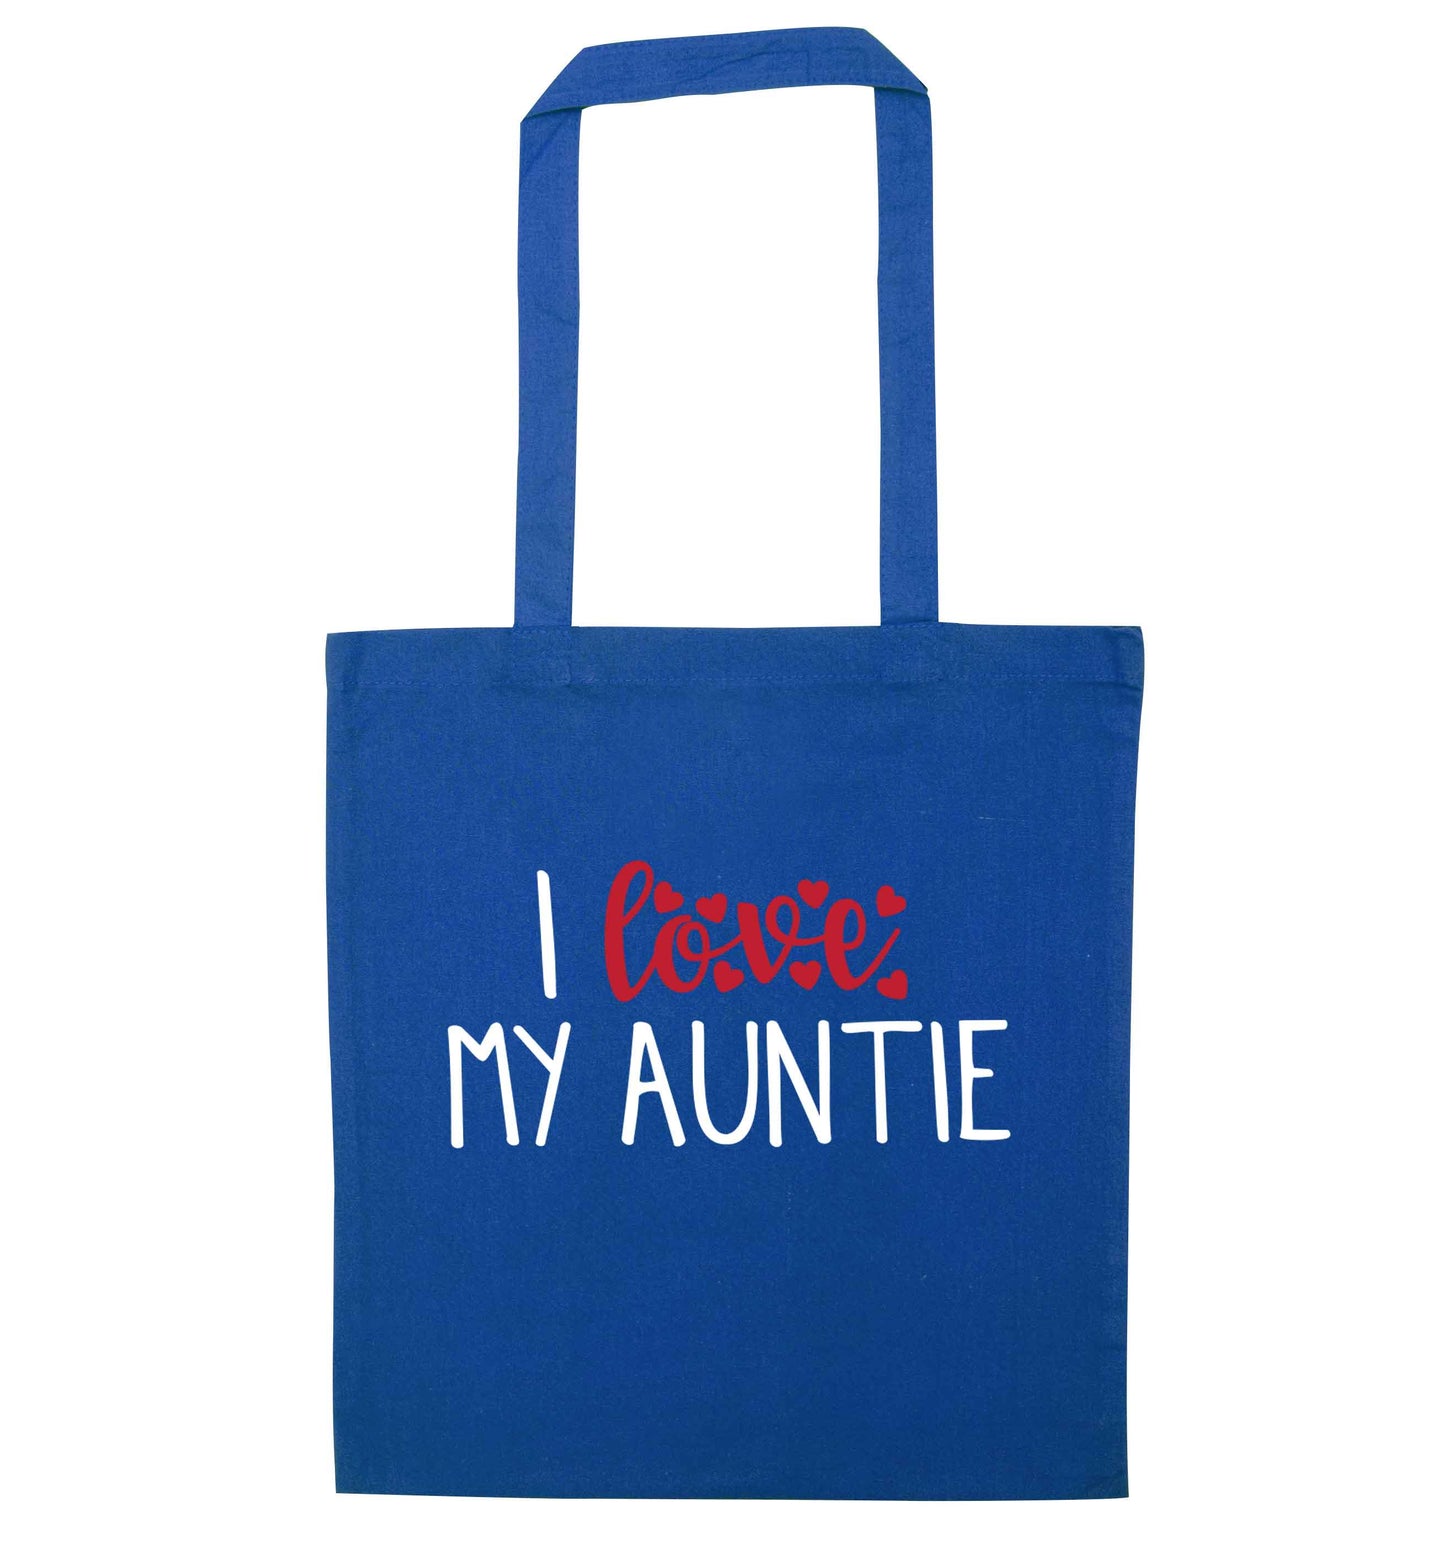 I love my auntie blue tote bag